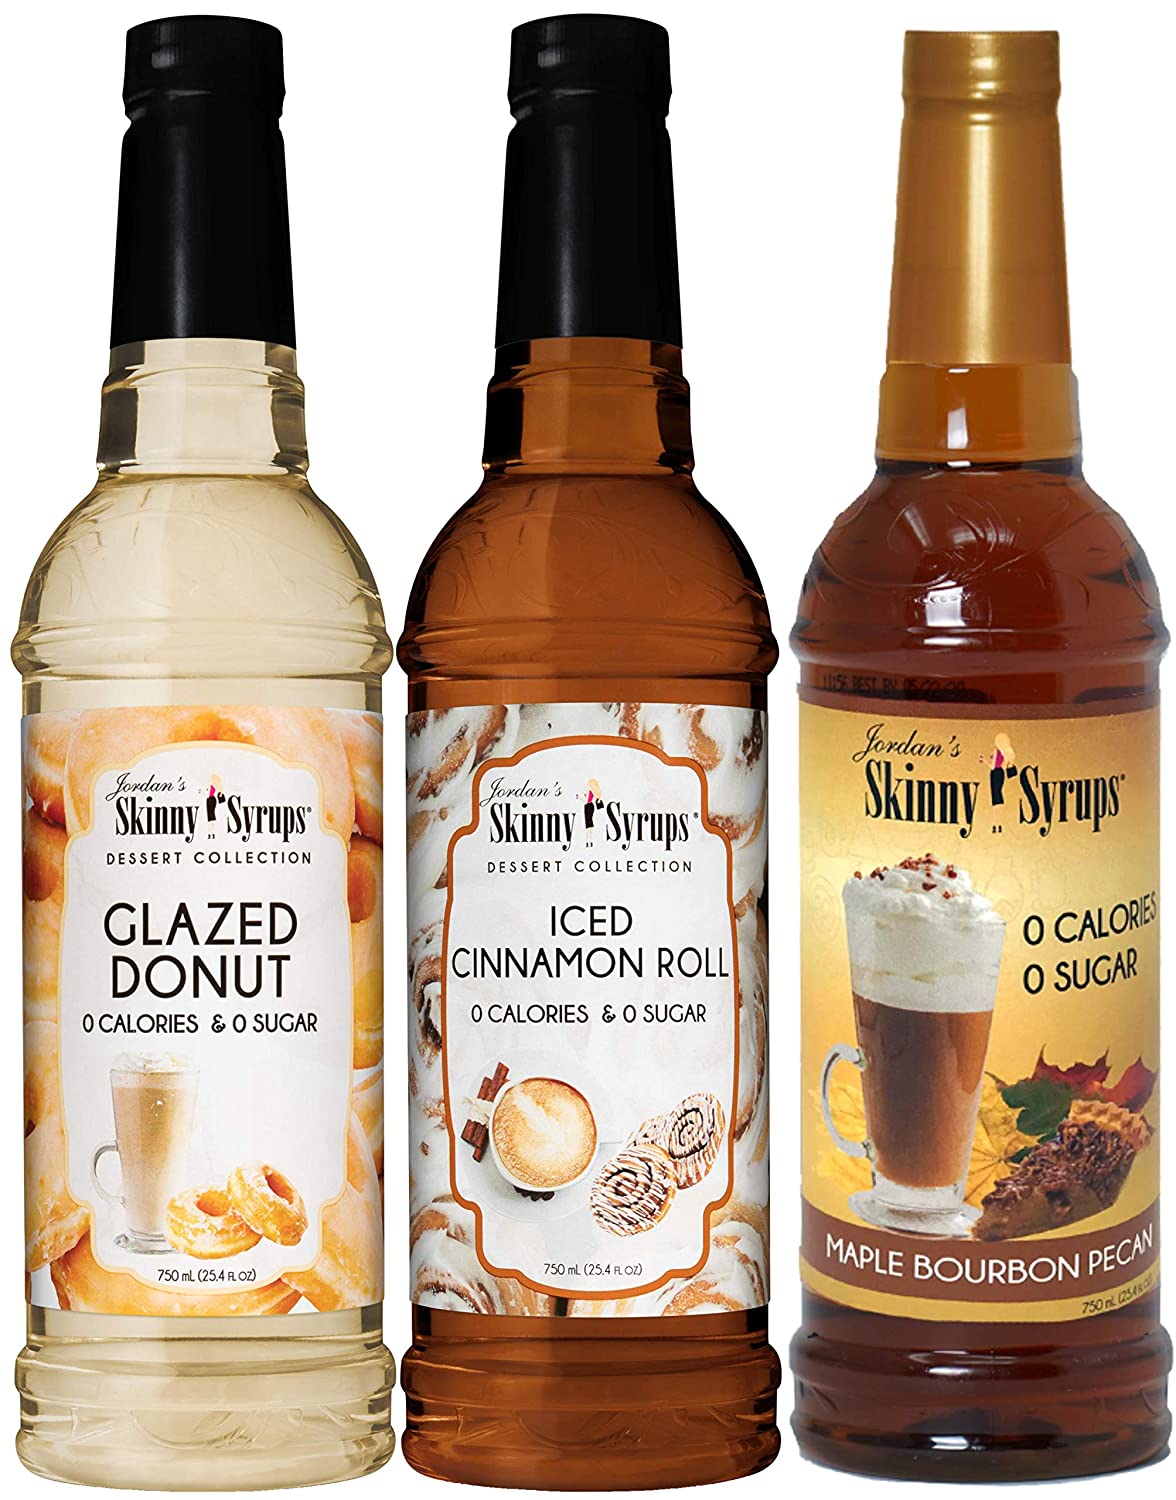 Jordan's Syrups Sugar Free Dessert Trio, Glazed Donut, Cinnamon Roll, and Maple Bourbon Pecan 750 ml (Pack of 3) with By The Cup Coasters